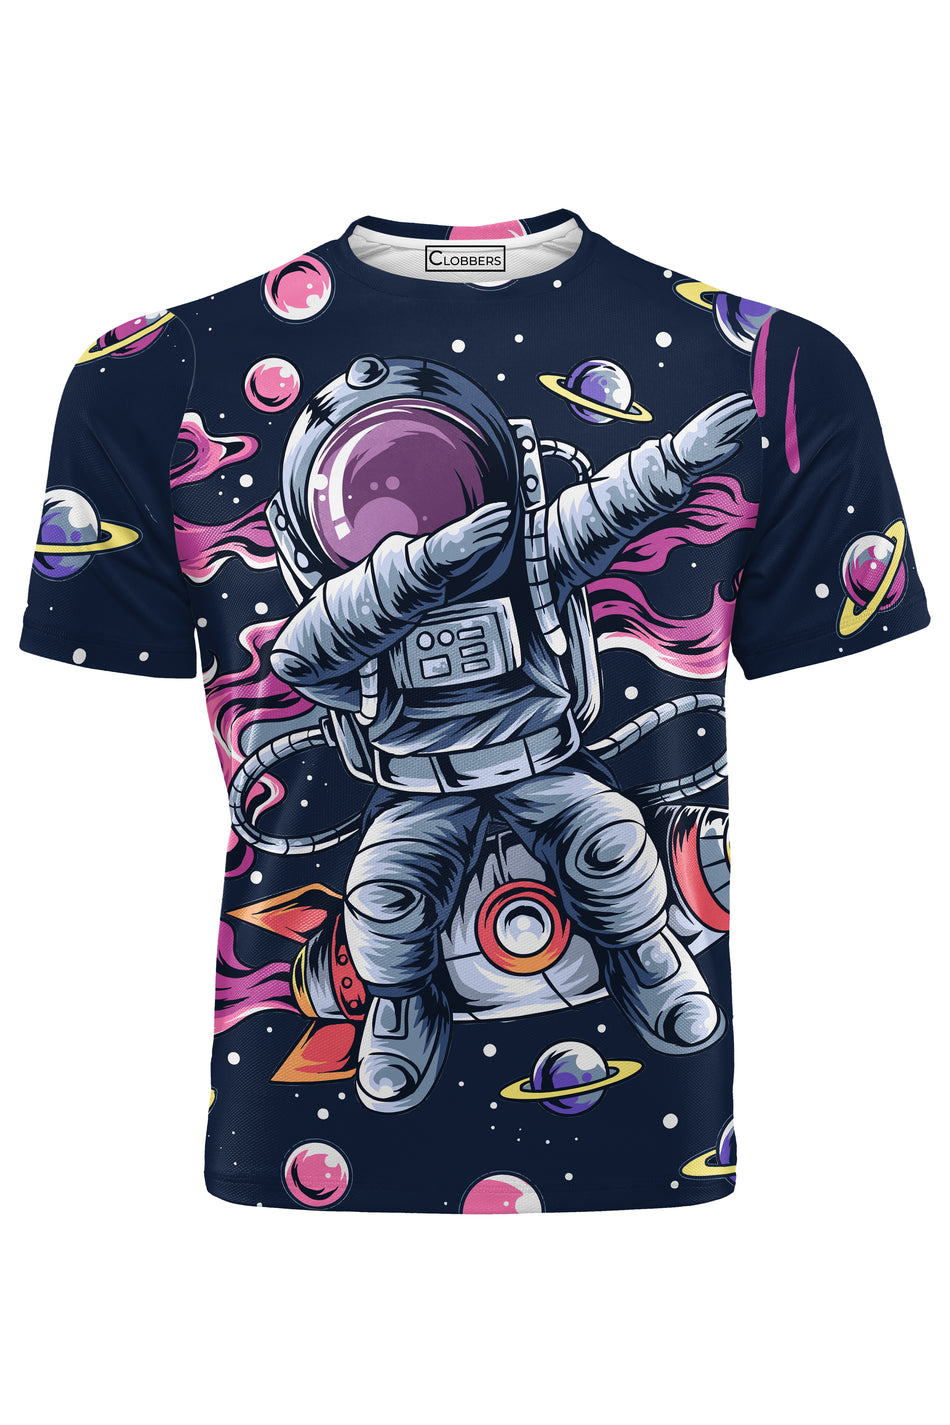 AOUT - COOL ASTRO TSHIRT